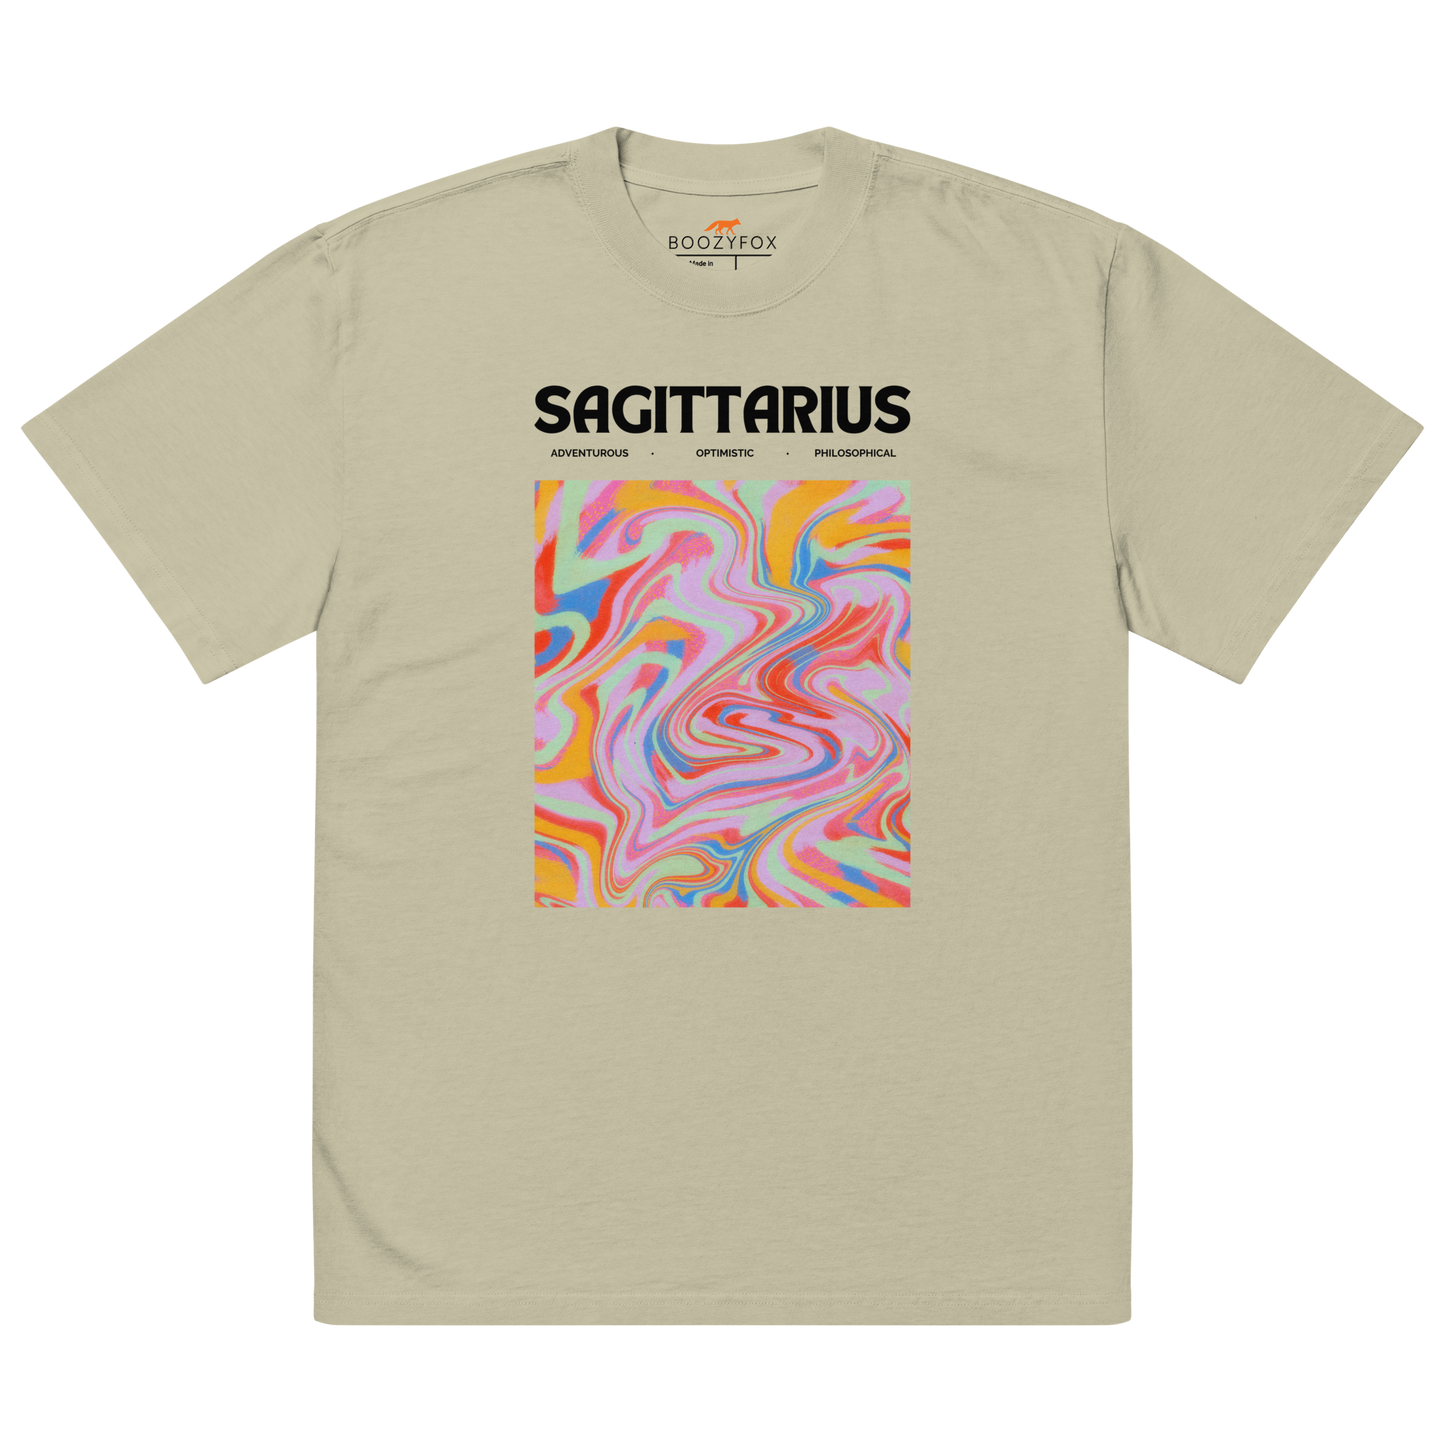 Faded Eucalyptus Sagittarius Oversized T-Shirt featuring an Abstract Sagittarius Star Sign graphic on the chest - Cool Graphic Zodiac Oversized Tees - Boozy Fox